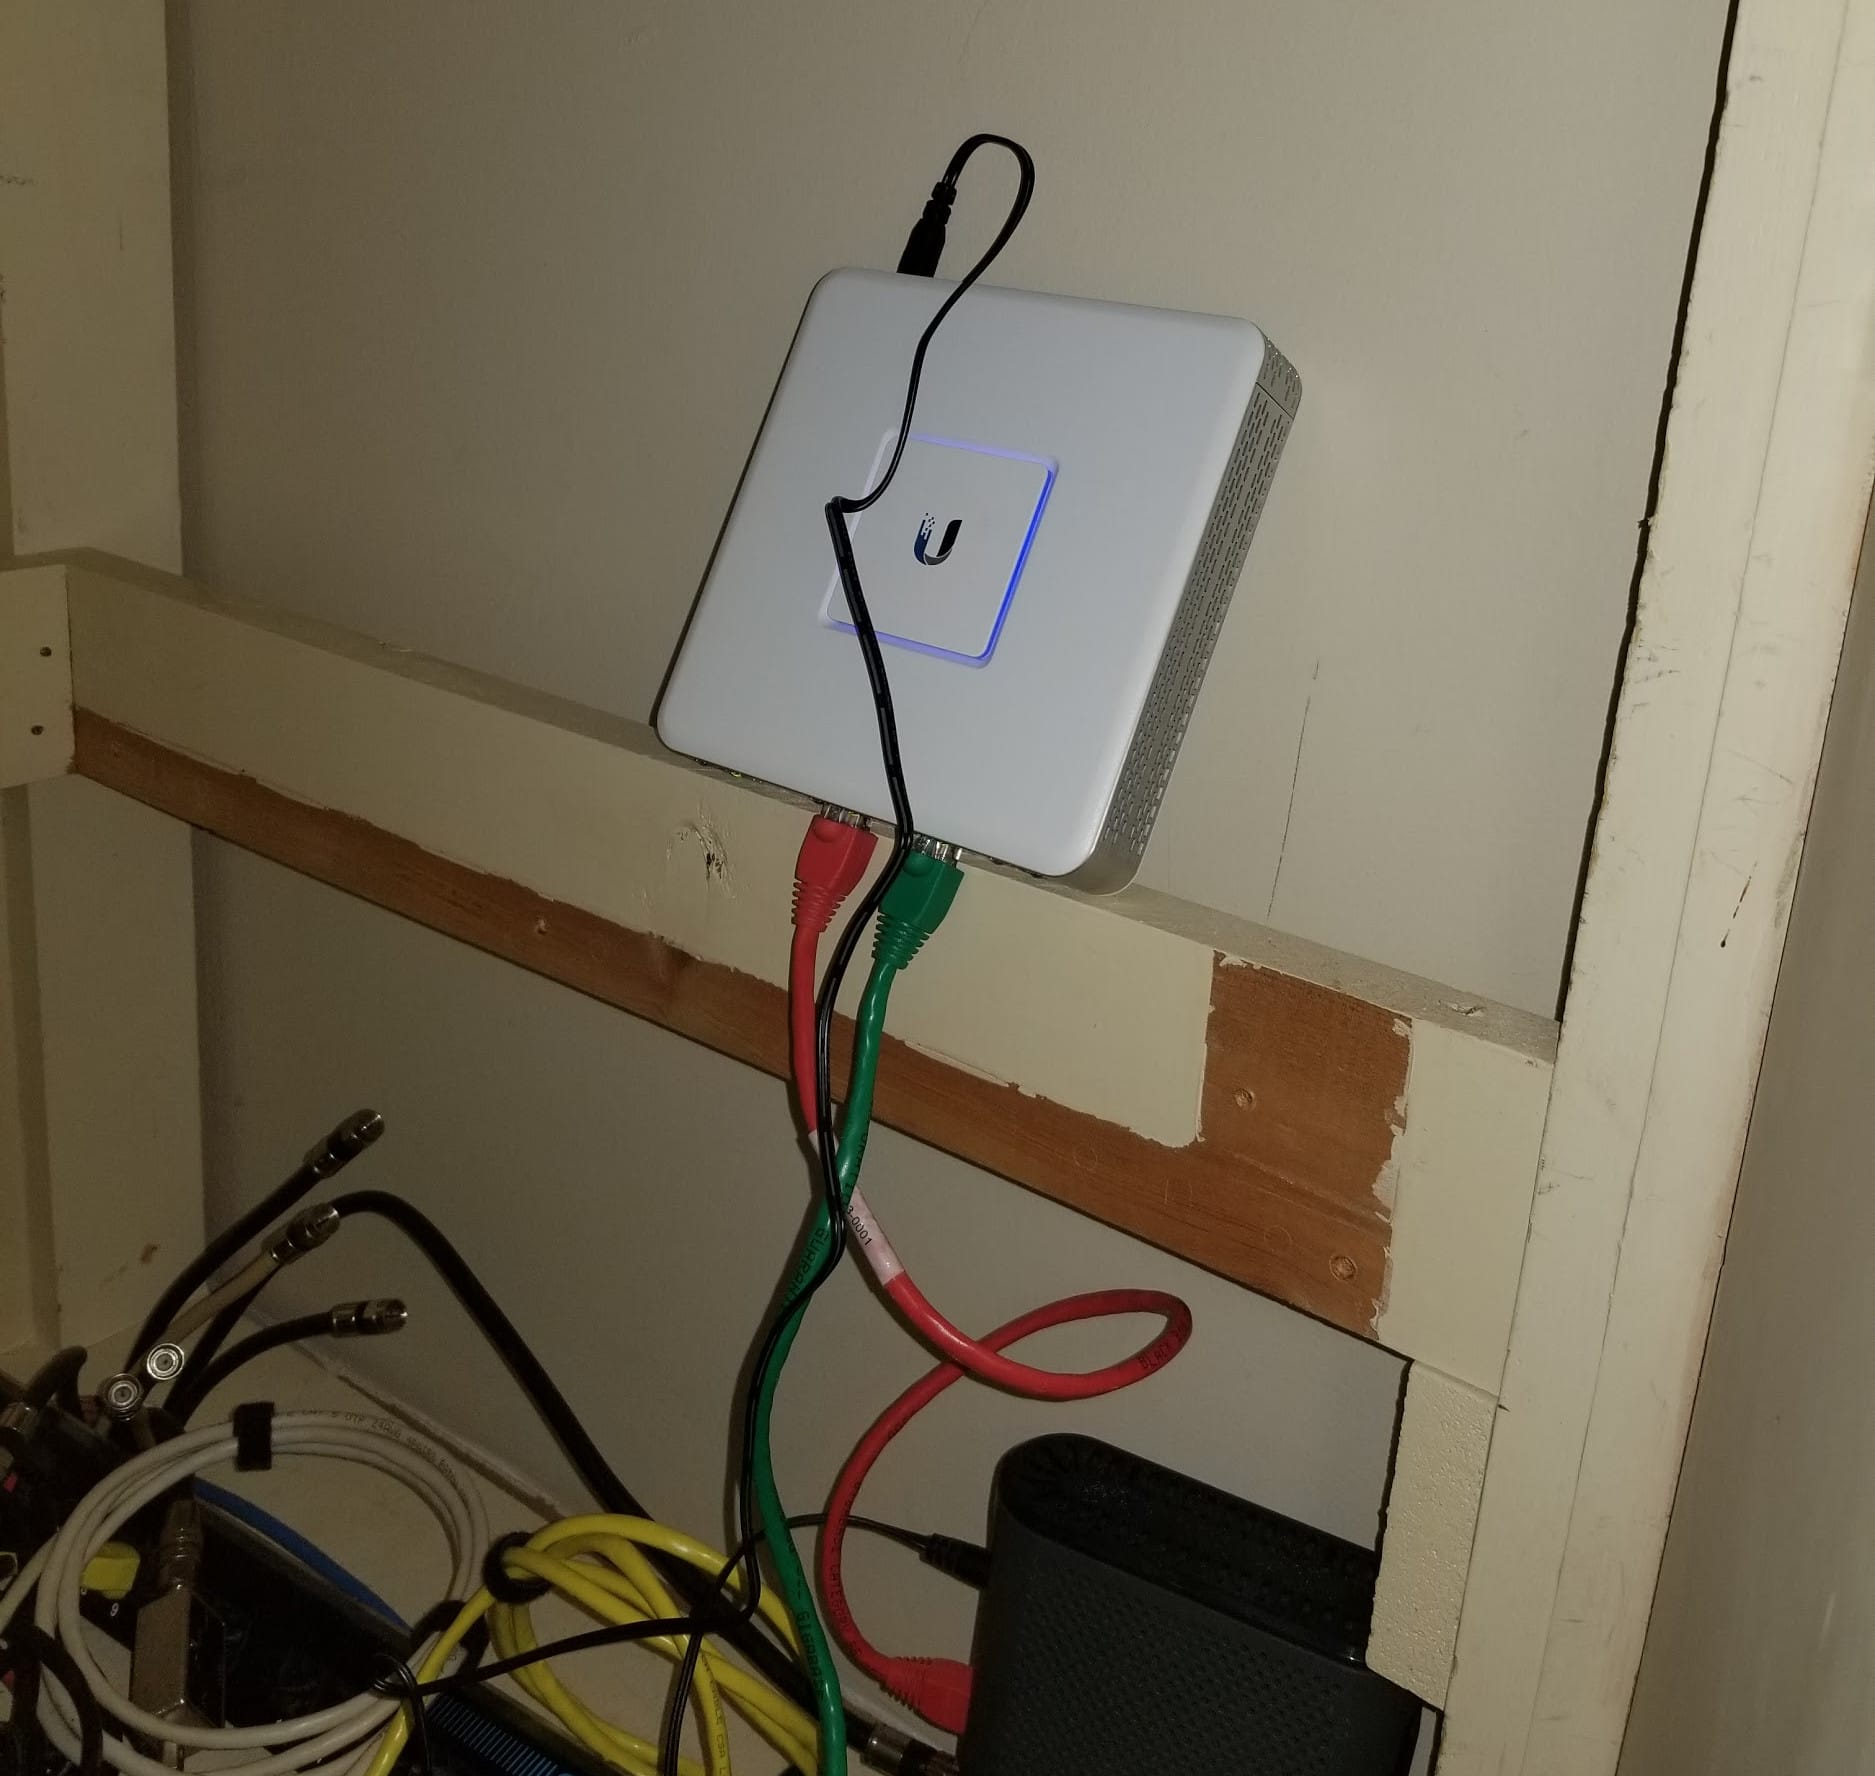 How I Adopted a Ubiquiti Unifi Security Gateway on my Existing